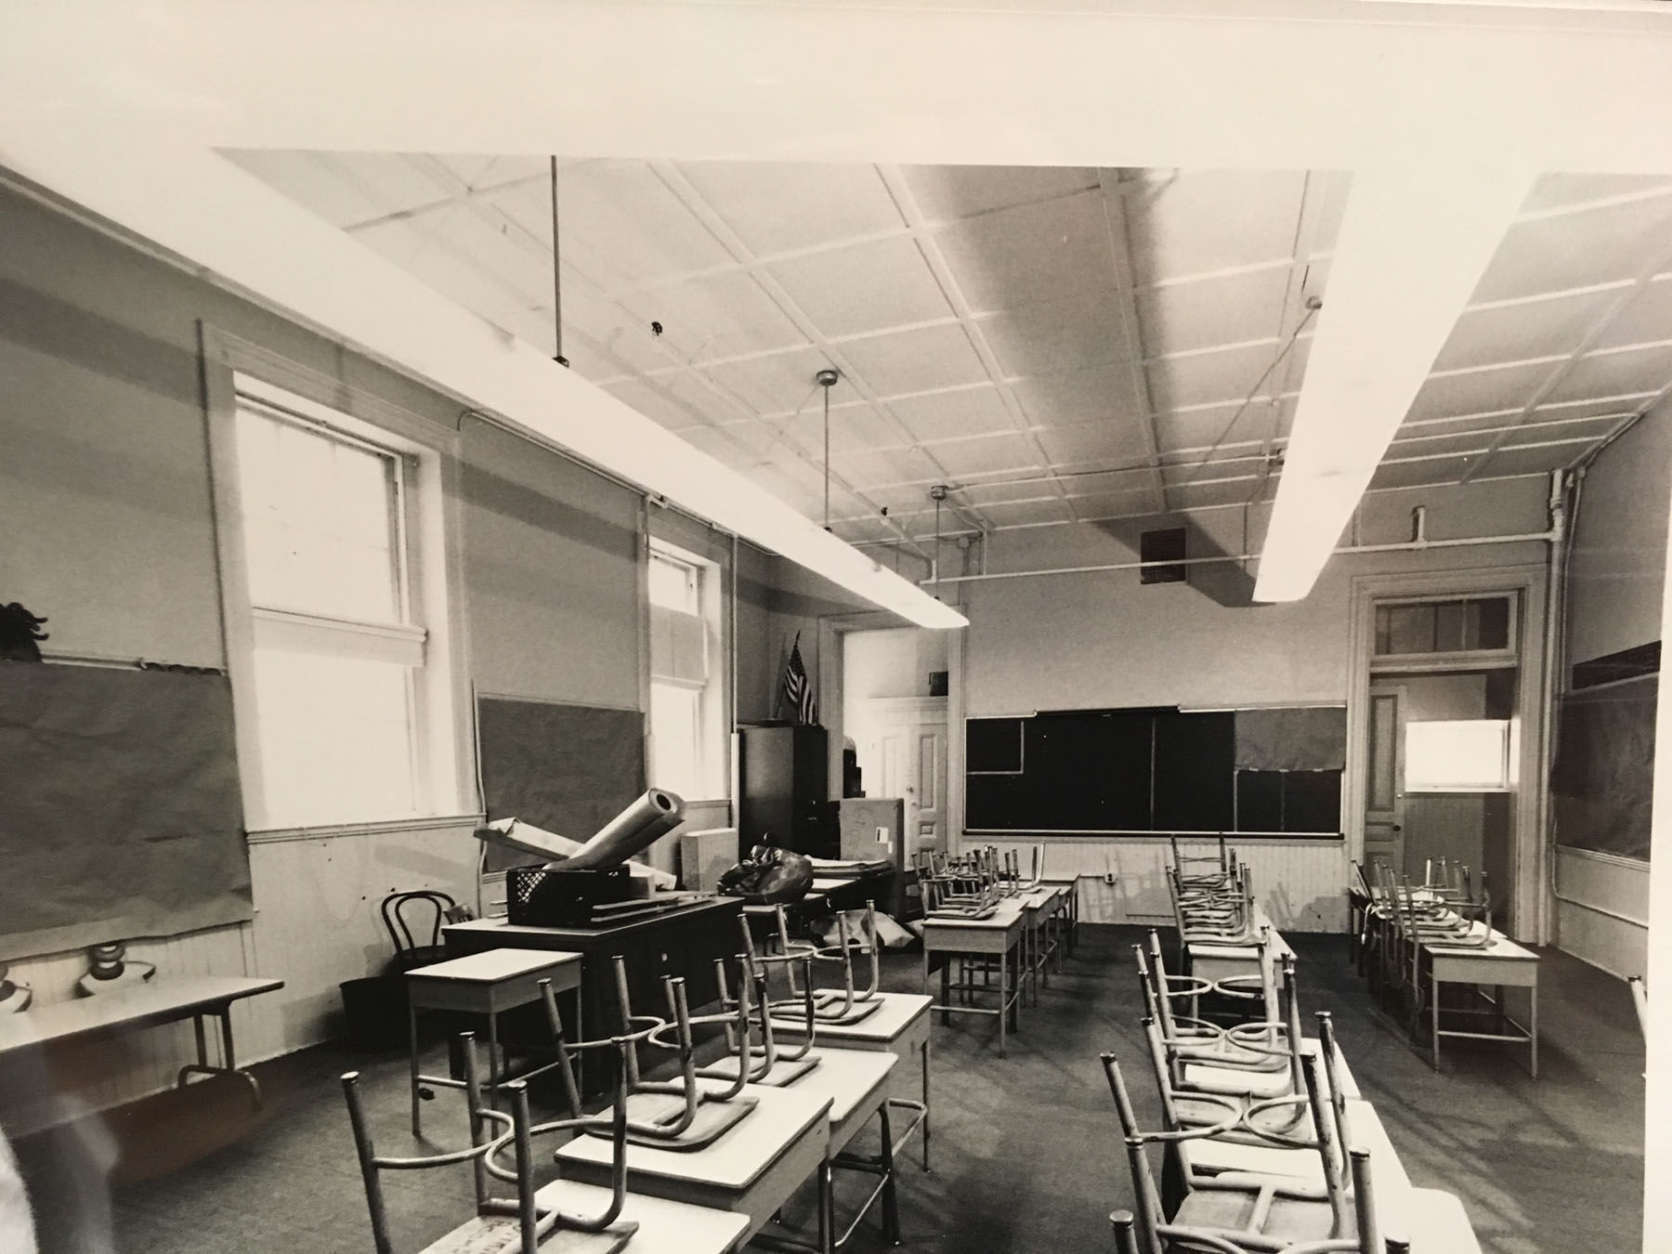 These photos from the 1980s -- a few years after Amy Carter attended school there -- depict the school's interior. The school had 14 large, high-ceilinged rooms. The fourth-grade class Amy attended was combined with the fifth-grade. (Courtesy Charles Sumner School Museum and Archives)